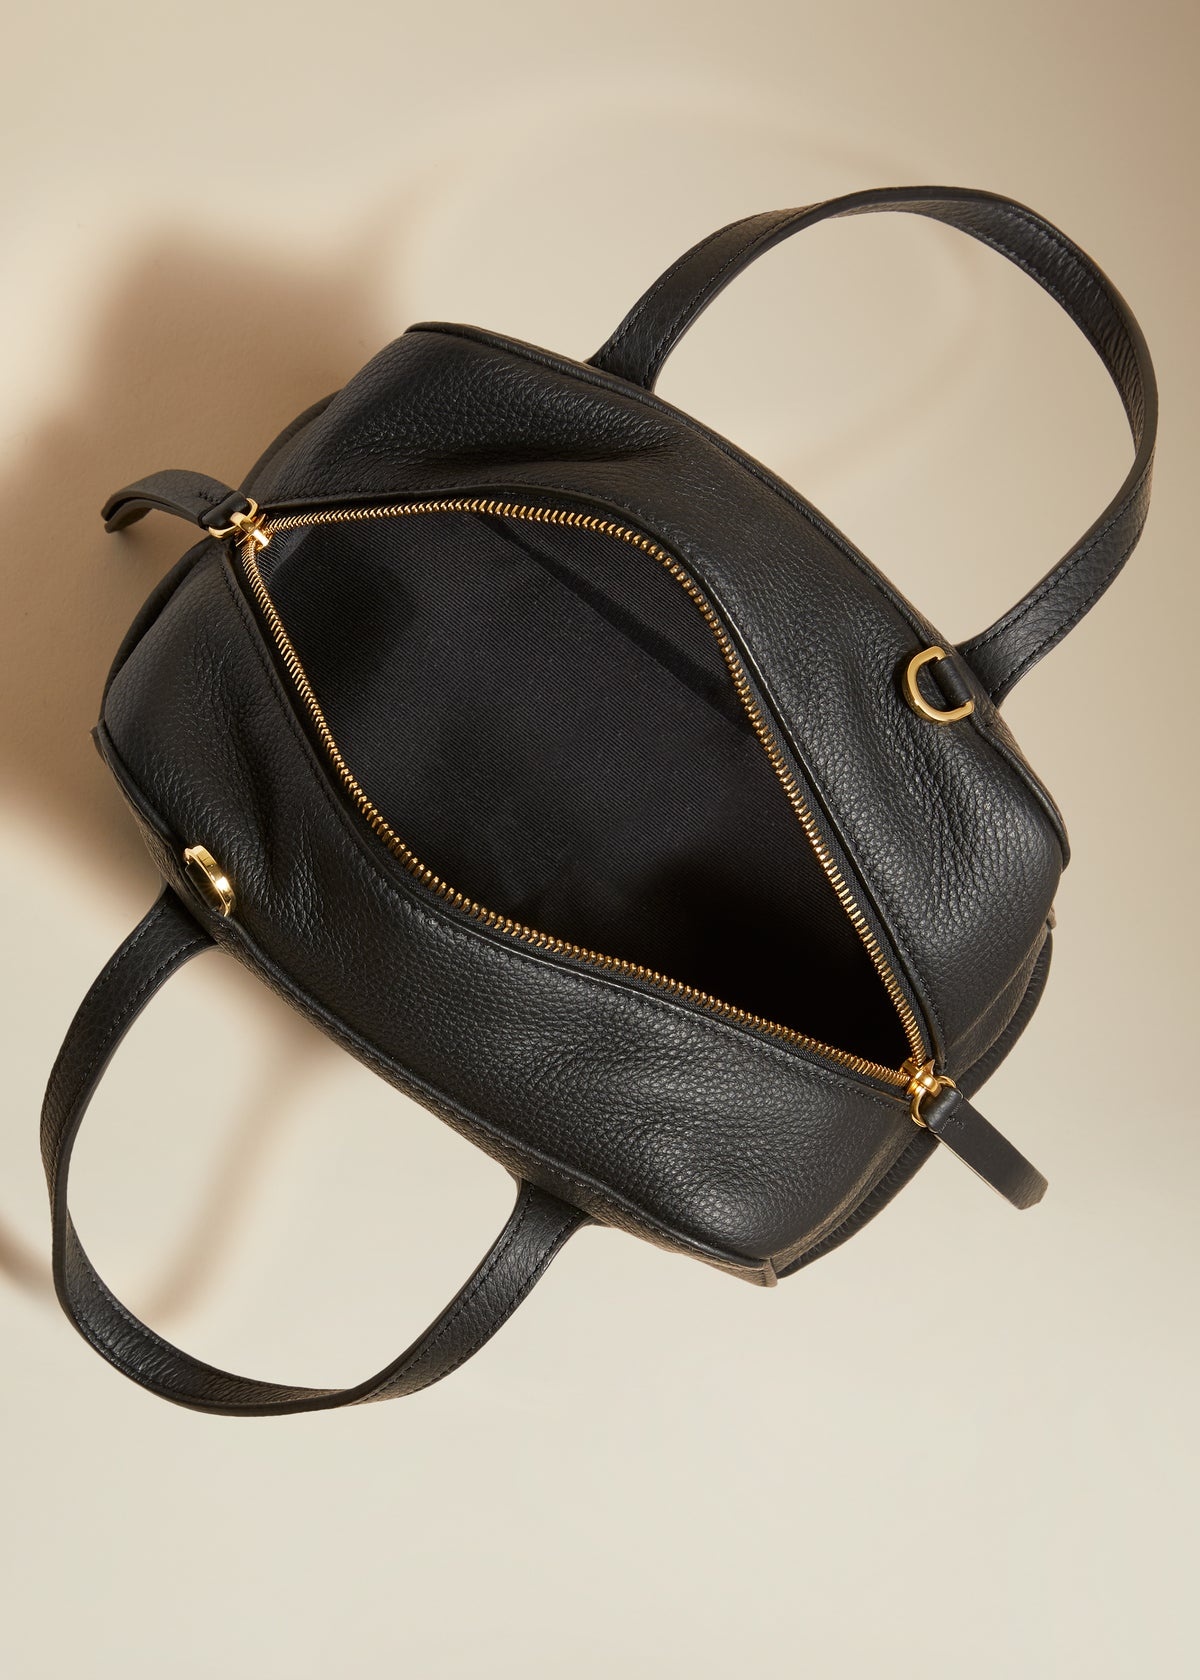 The Small Maeve Crossbody Bag in Black Pebbled Leather - 4